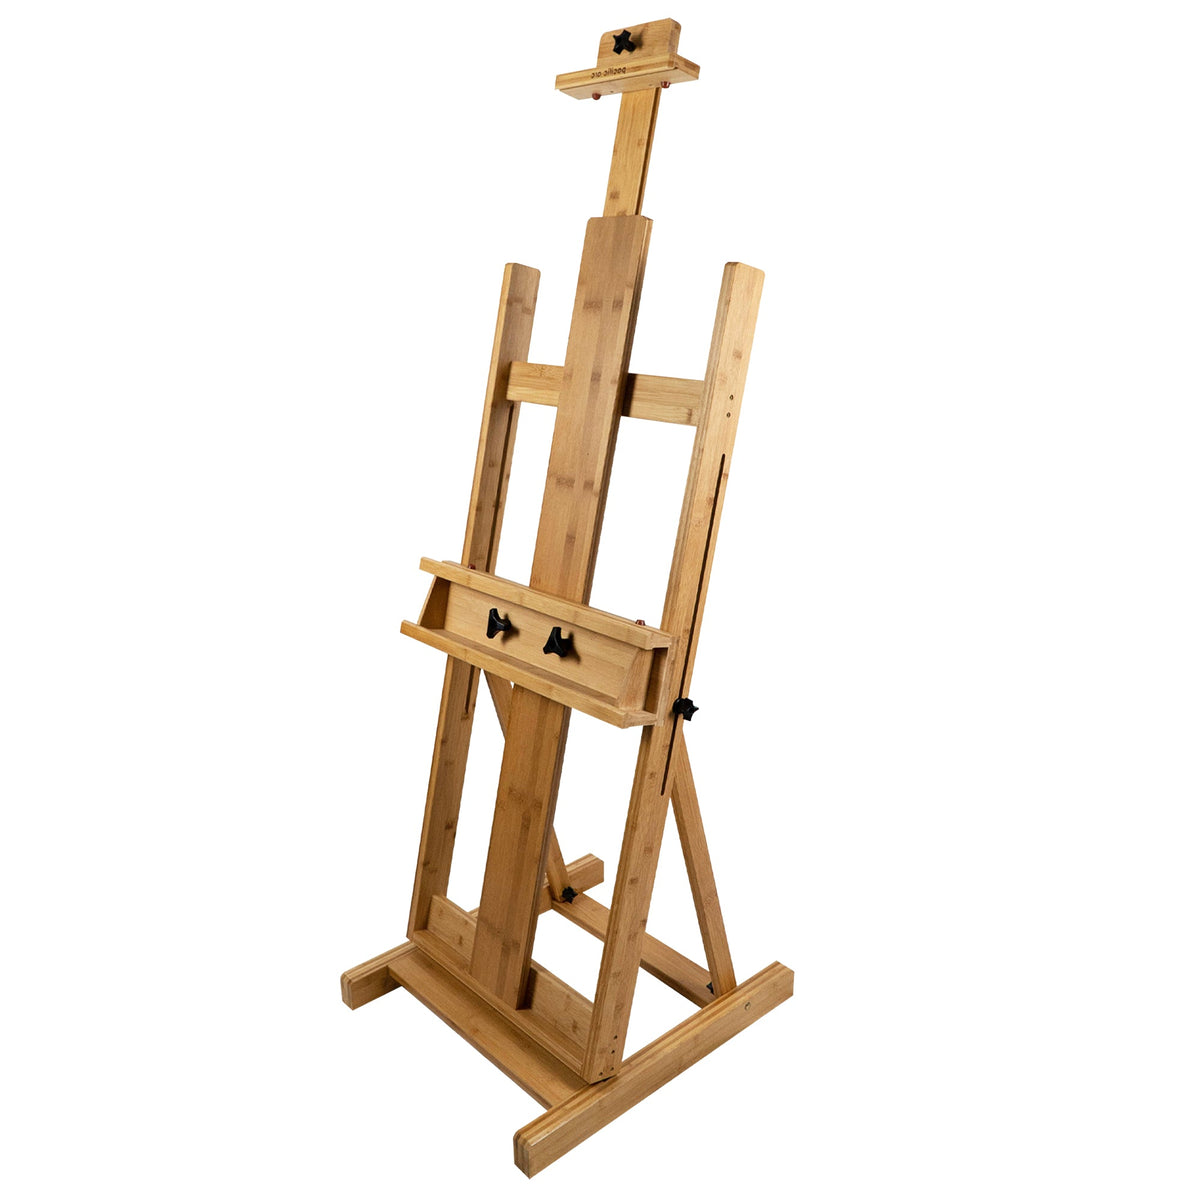 Large Studio H-Frame Easel - Solid Bamboo Wood Artist Easel Adjustable Movable Tilting Easel, Floor Painting Easel Stand, Holds Canvas Art up to 81"